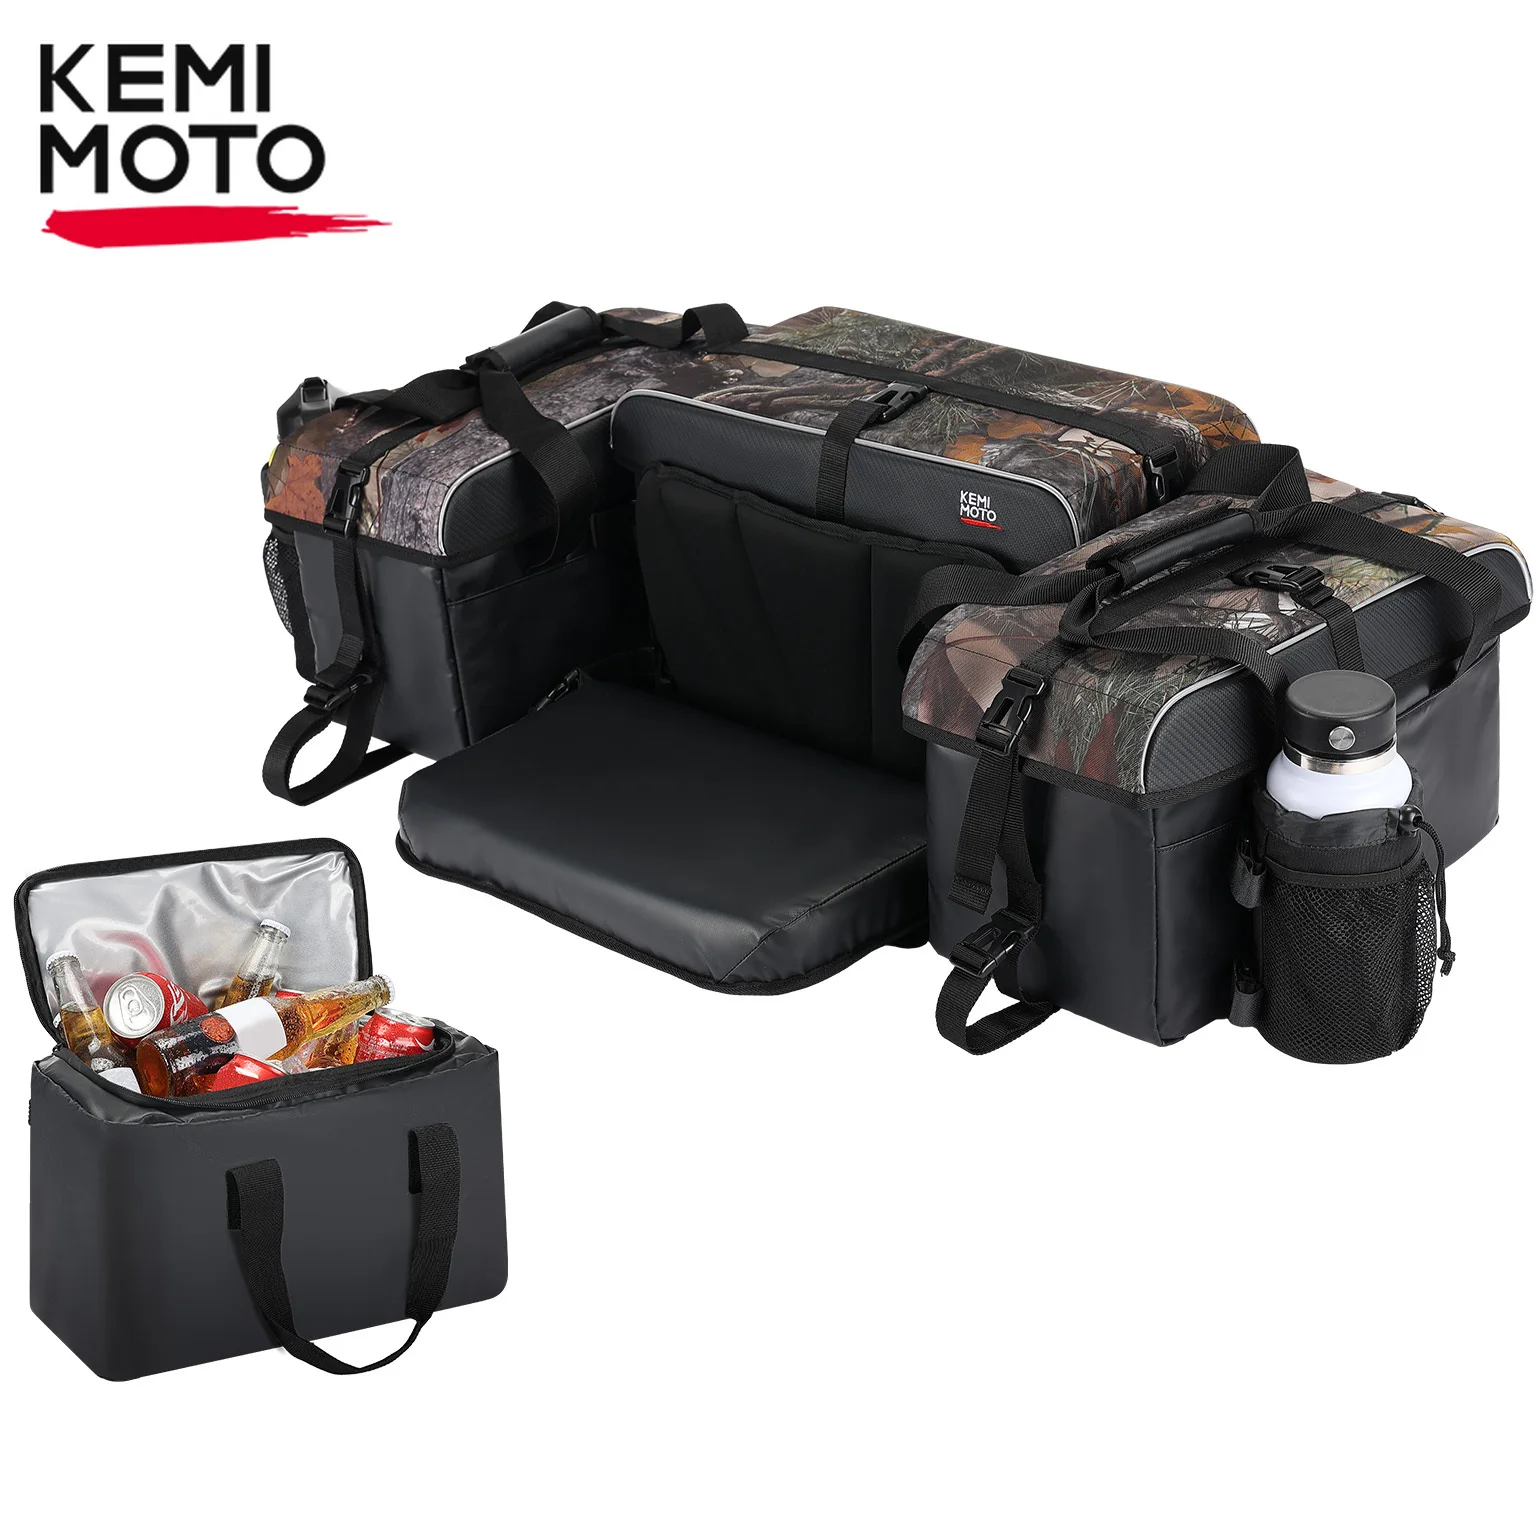 waterproof bike rear seat bag expandable mtb bicycle rack trunk bag cycling luggage storage bag pack pannier Rear Cargo Bag Compatible with Polaris Sportsman 500 for Cf Moto 500 for Linhai 400 for Can Am Utility ATV Quad Rack Seat Bag